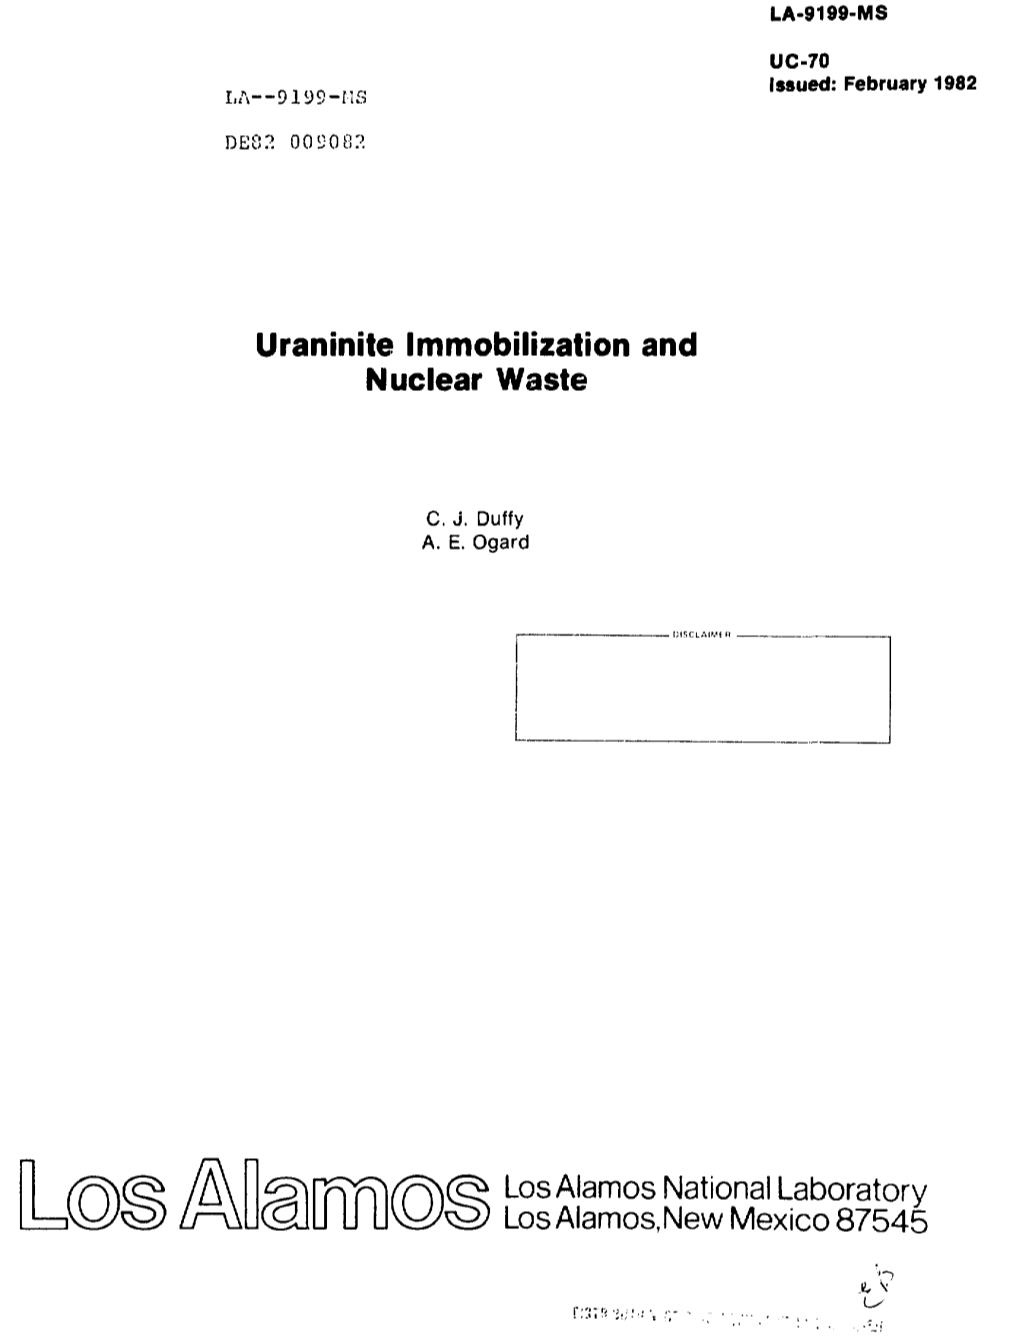 Uraninite Immobilization and Nuclear Waste Los Alamos National